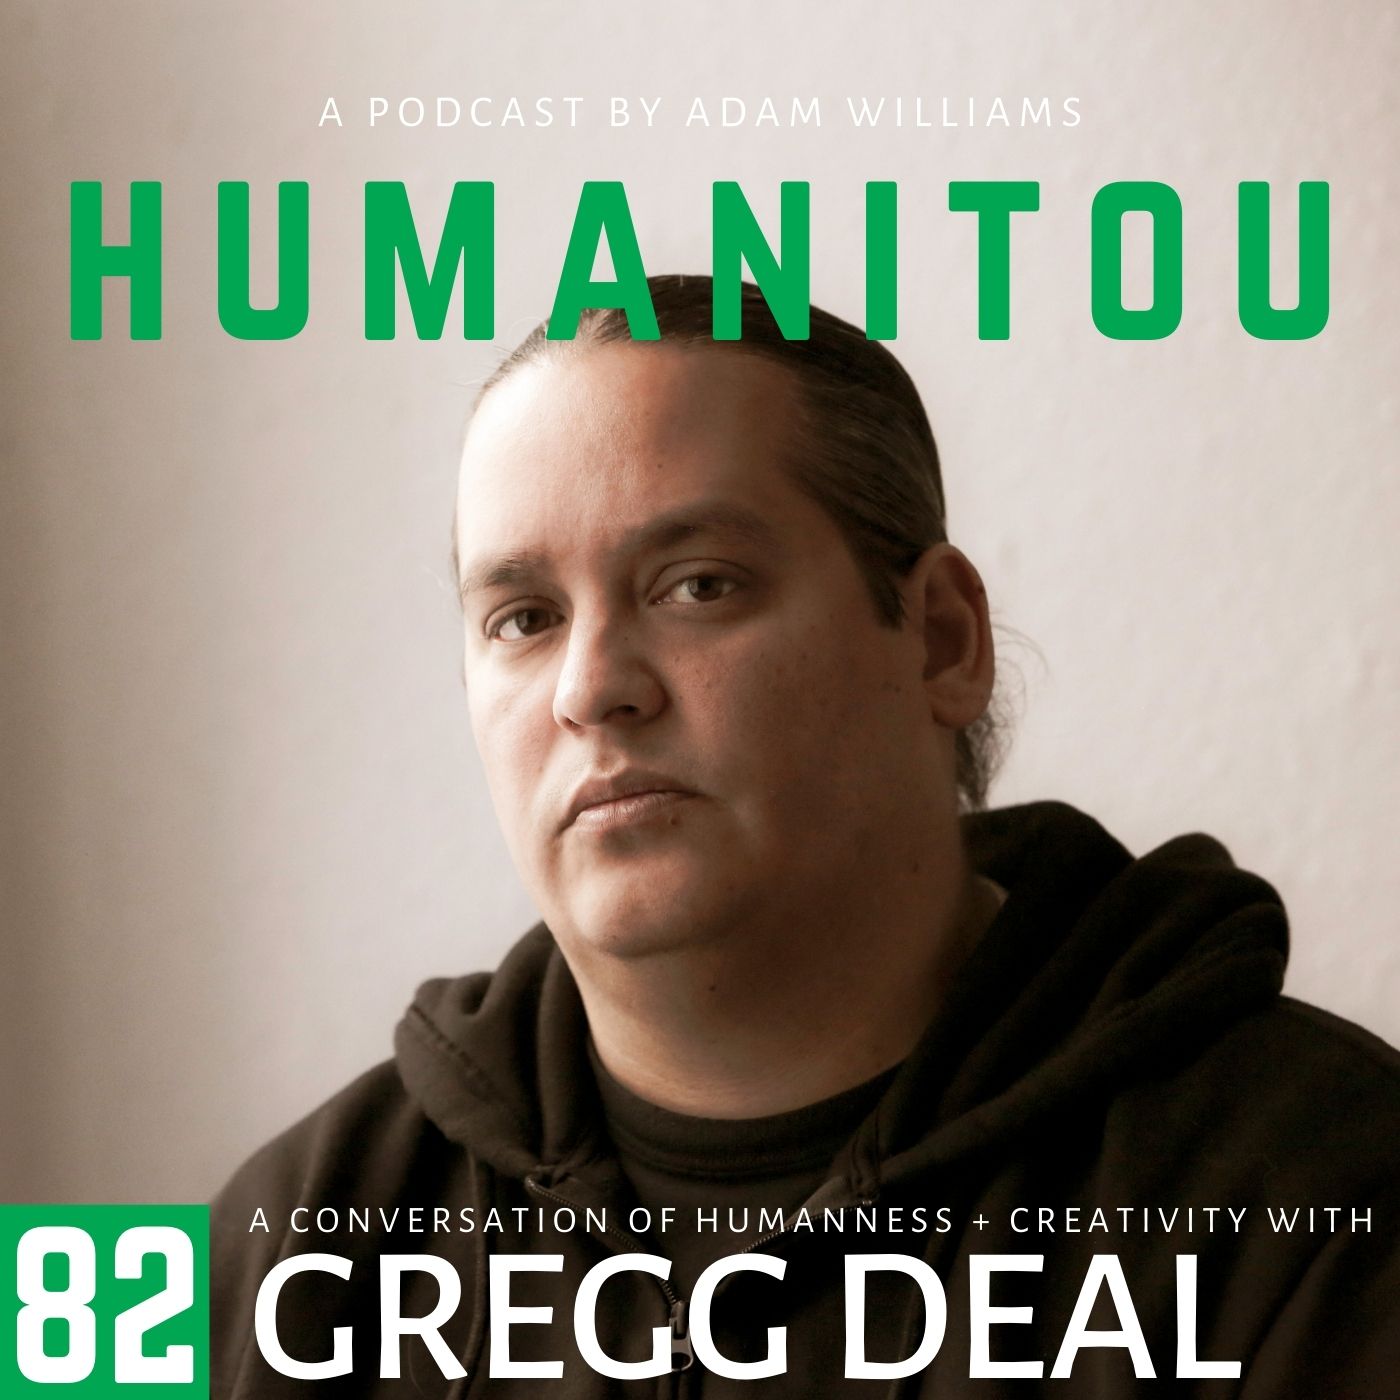 82: Gregg Deal, multidisciplinary artist, on identity and stereotypes, resilience, impermanence and fatherhood